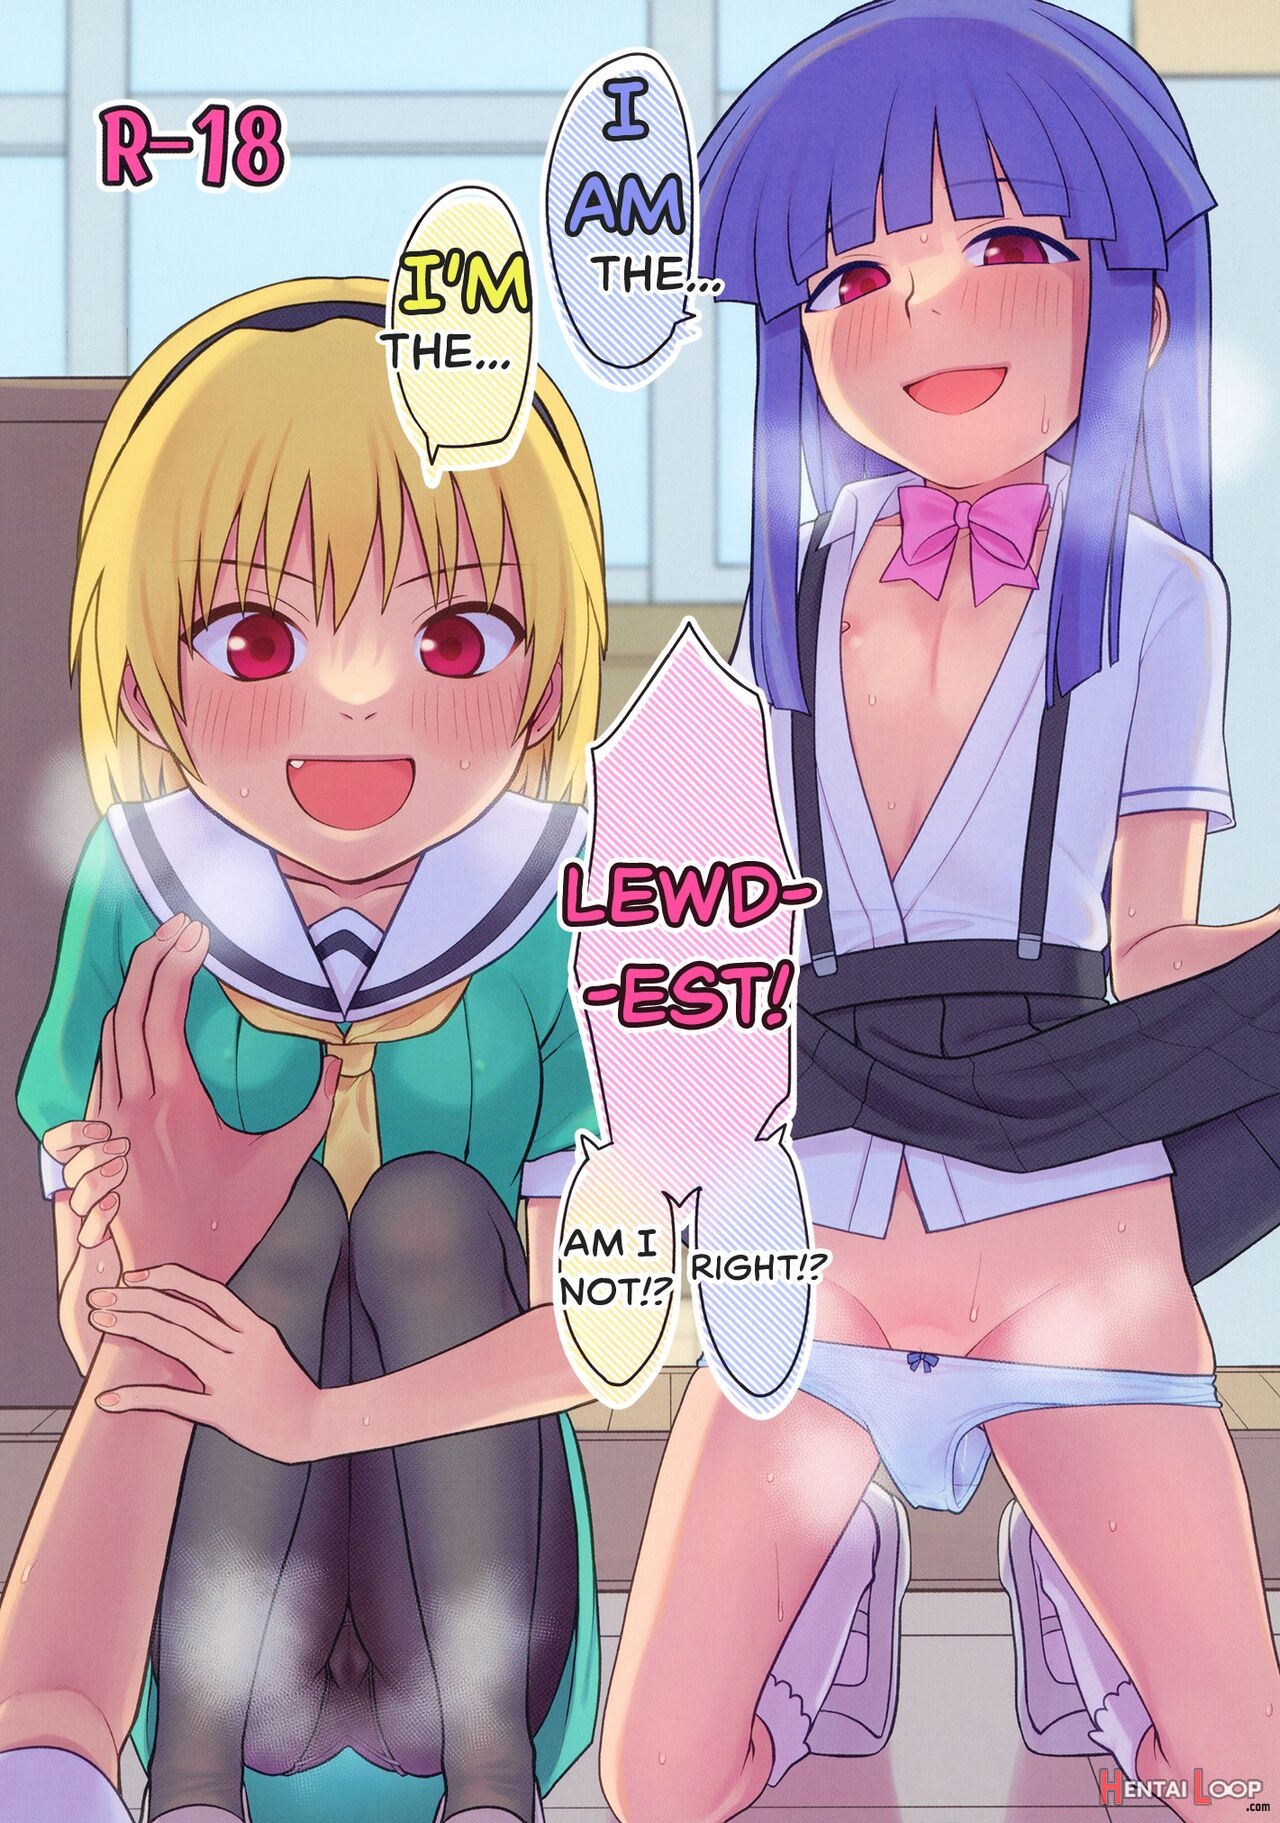 "i Am The..." "i'm The..." "lewdest!" "right!?" "am I Not!?" page 1